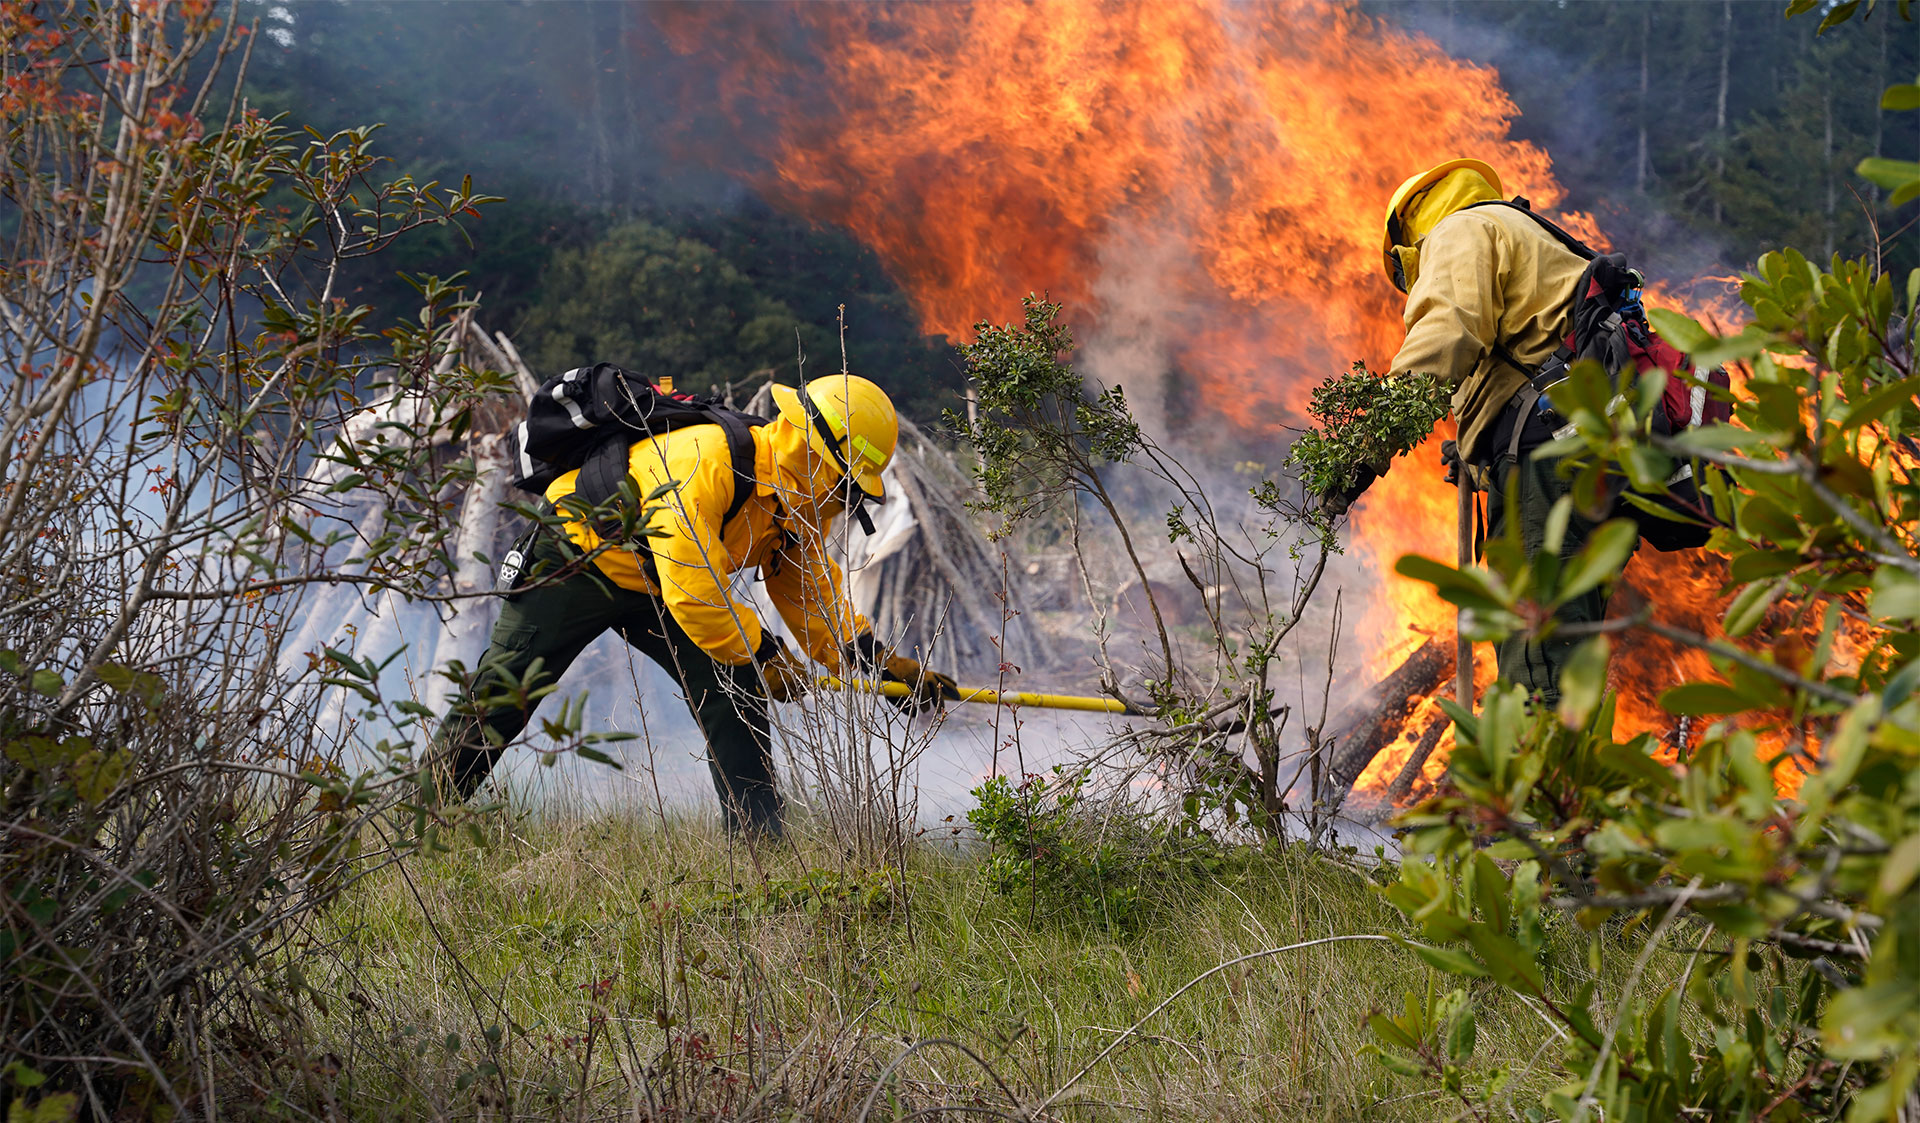 People in yellow fire protective gear working near a fire